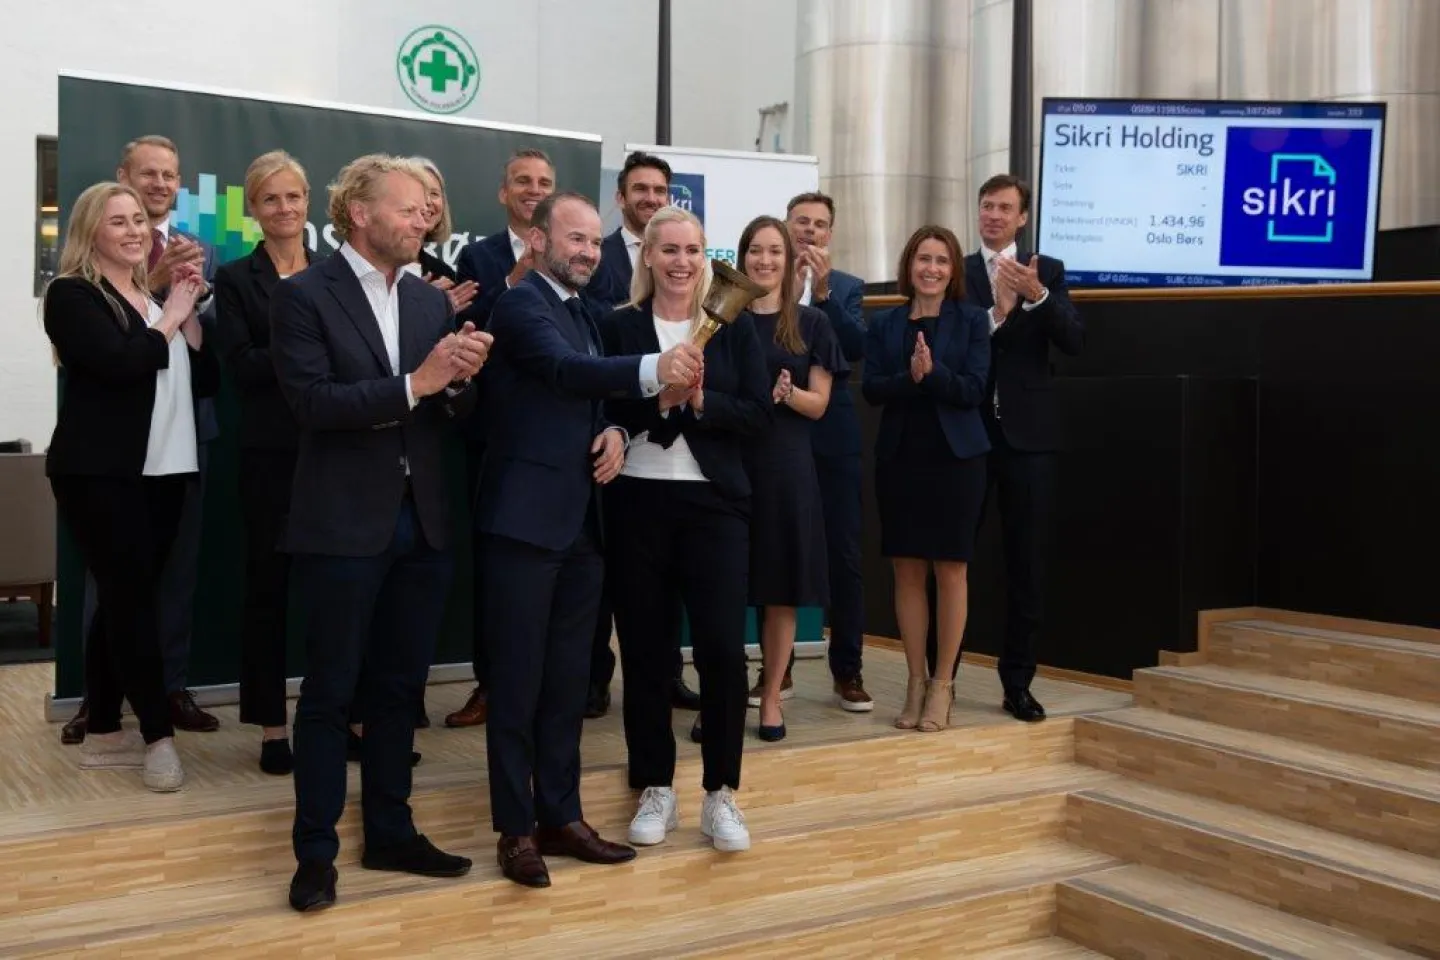 The Sikri Holding team ringing the bell to celebrate the transfer of the company to the Oslo Børs main market